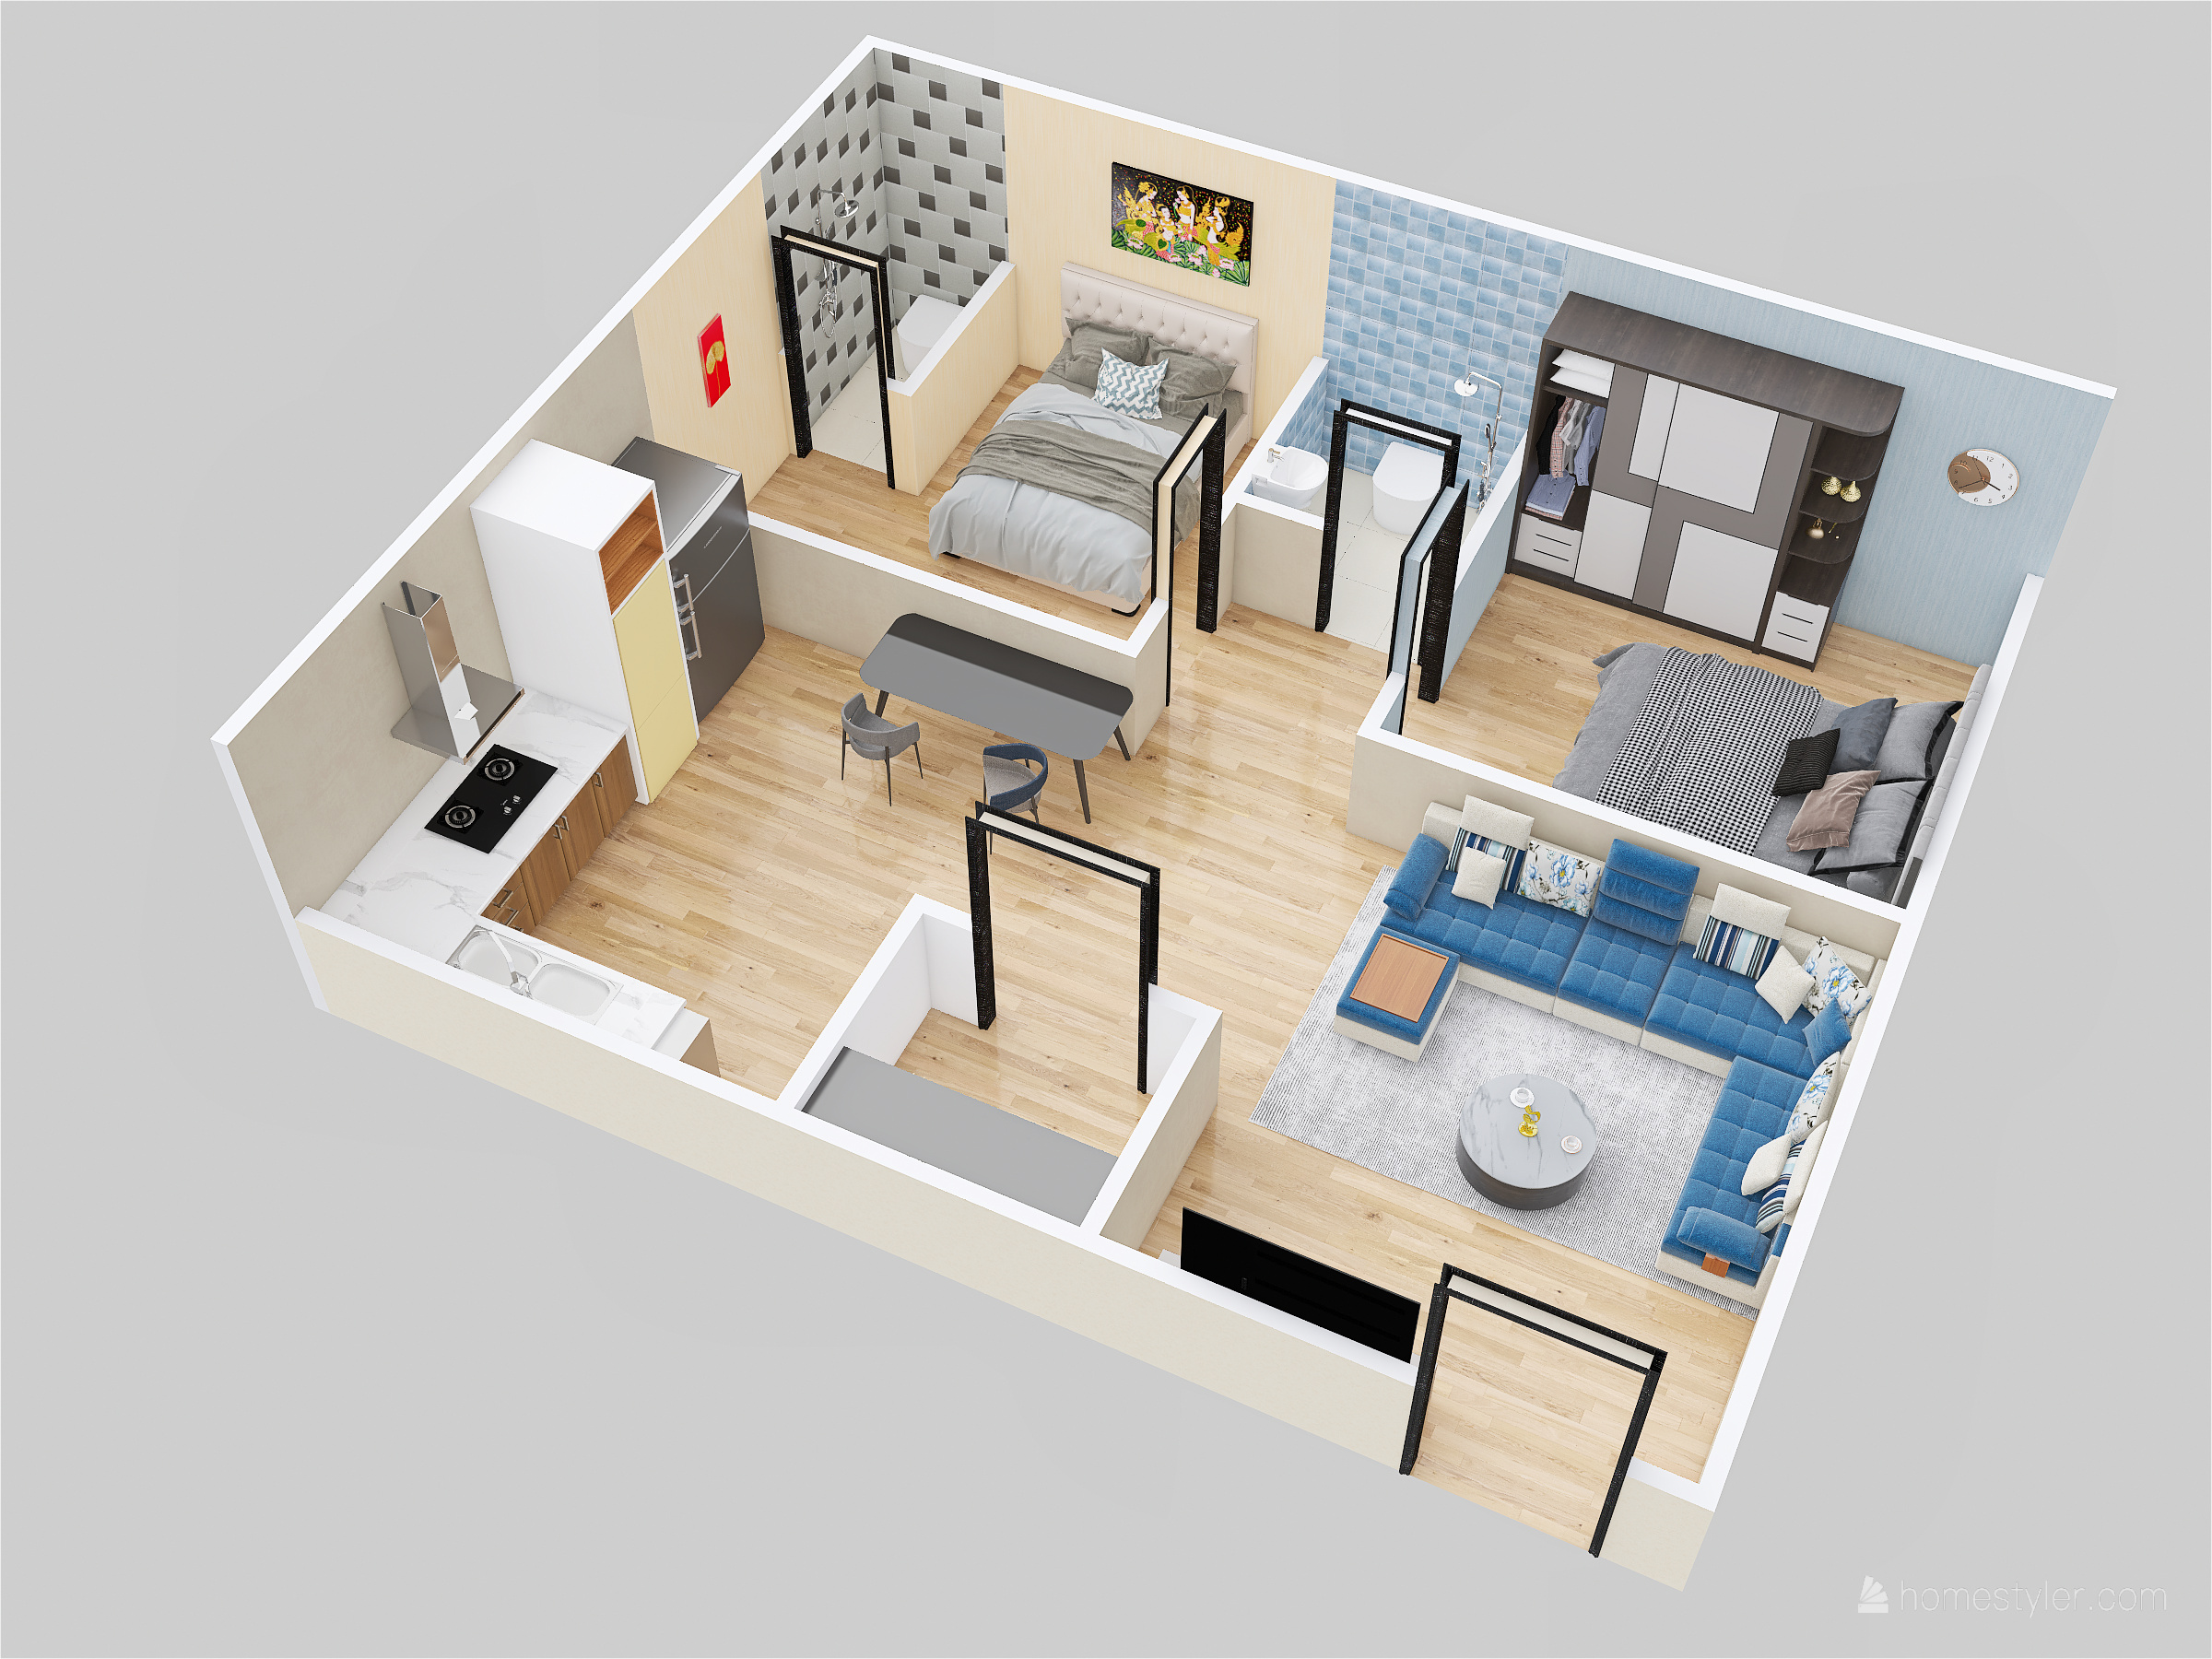 Understanding 3D Floor Plans And Finding The Right Layout For You